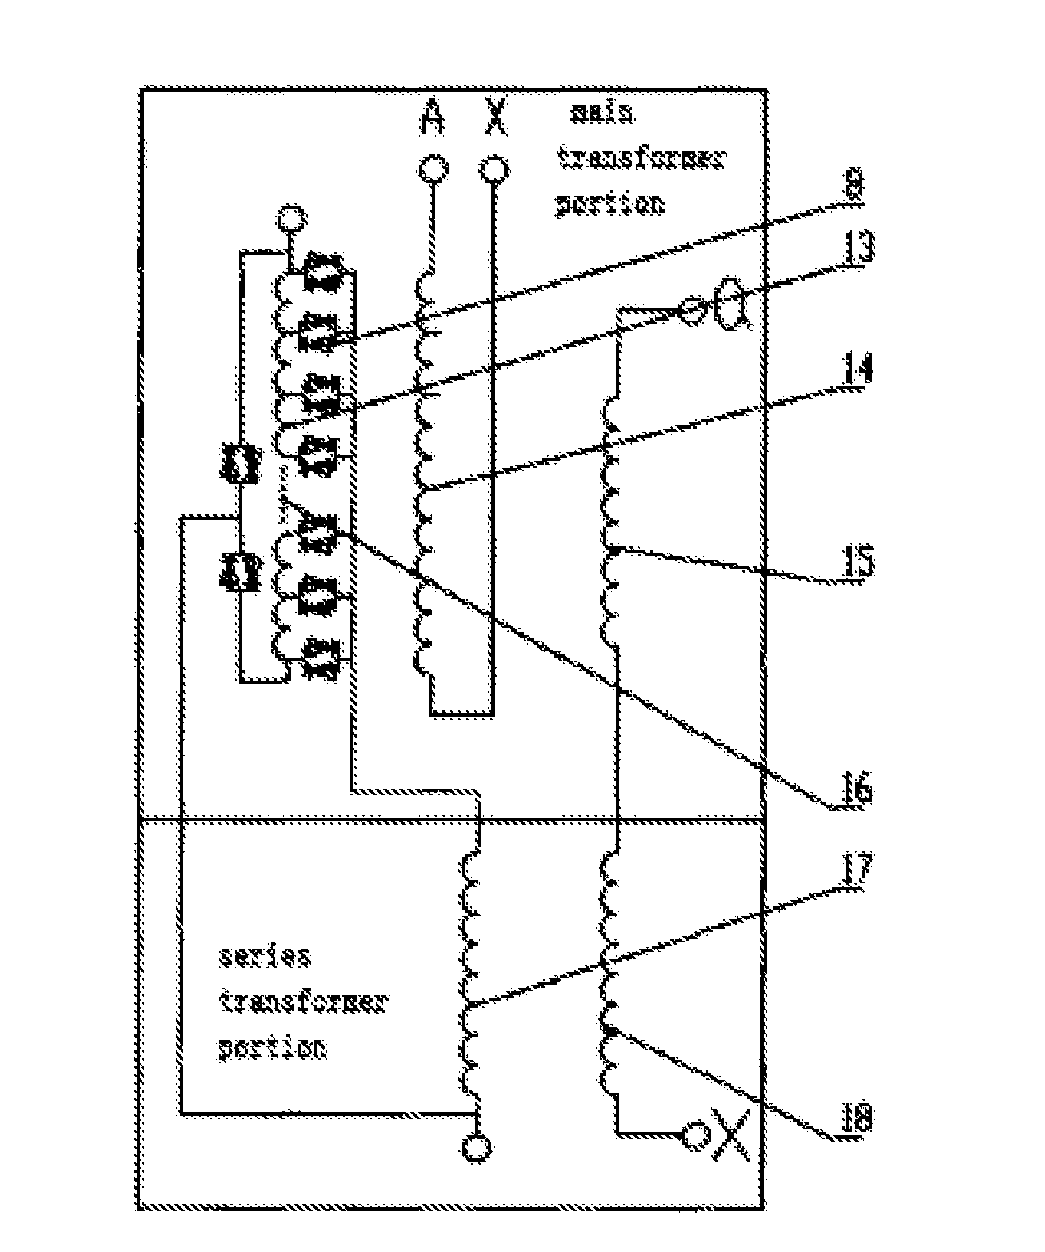 Transient impedance transformer based on ac voltage regulating electronic switch